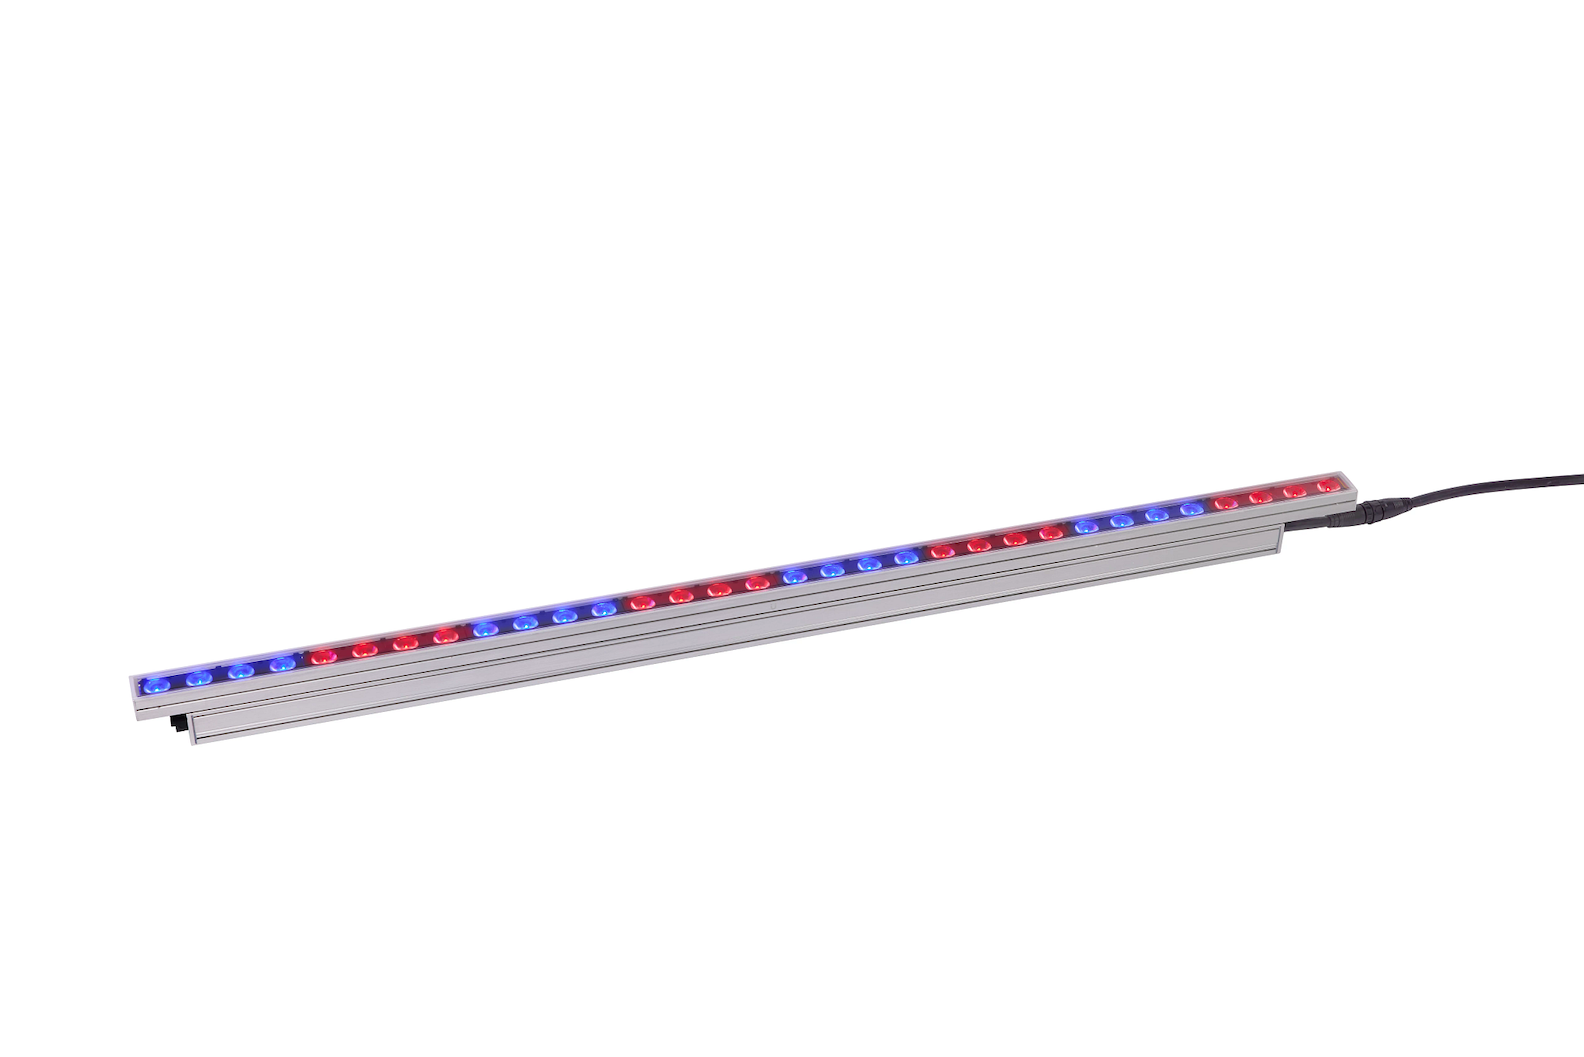 Martin Debuts Exterior Linear Pro Outdoor Architectural Fixture Series